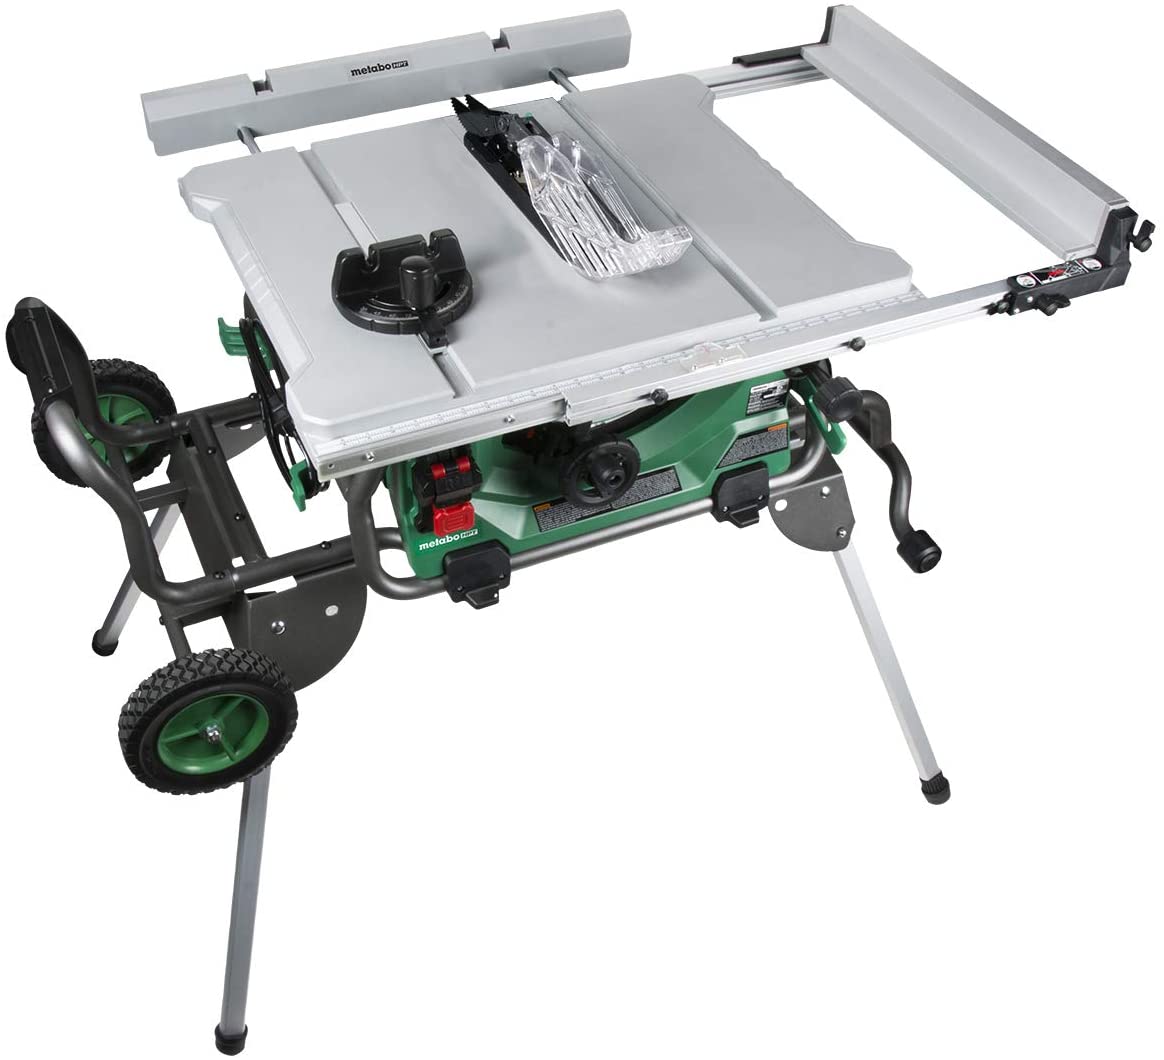 Metabo C10RJS - Best Table Saw in 2023: Portable, Hybrid, Cabinet, Contractor, mini, & Beginners Table Saws Reviews. - HandyMan.Guide - Table Saw